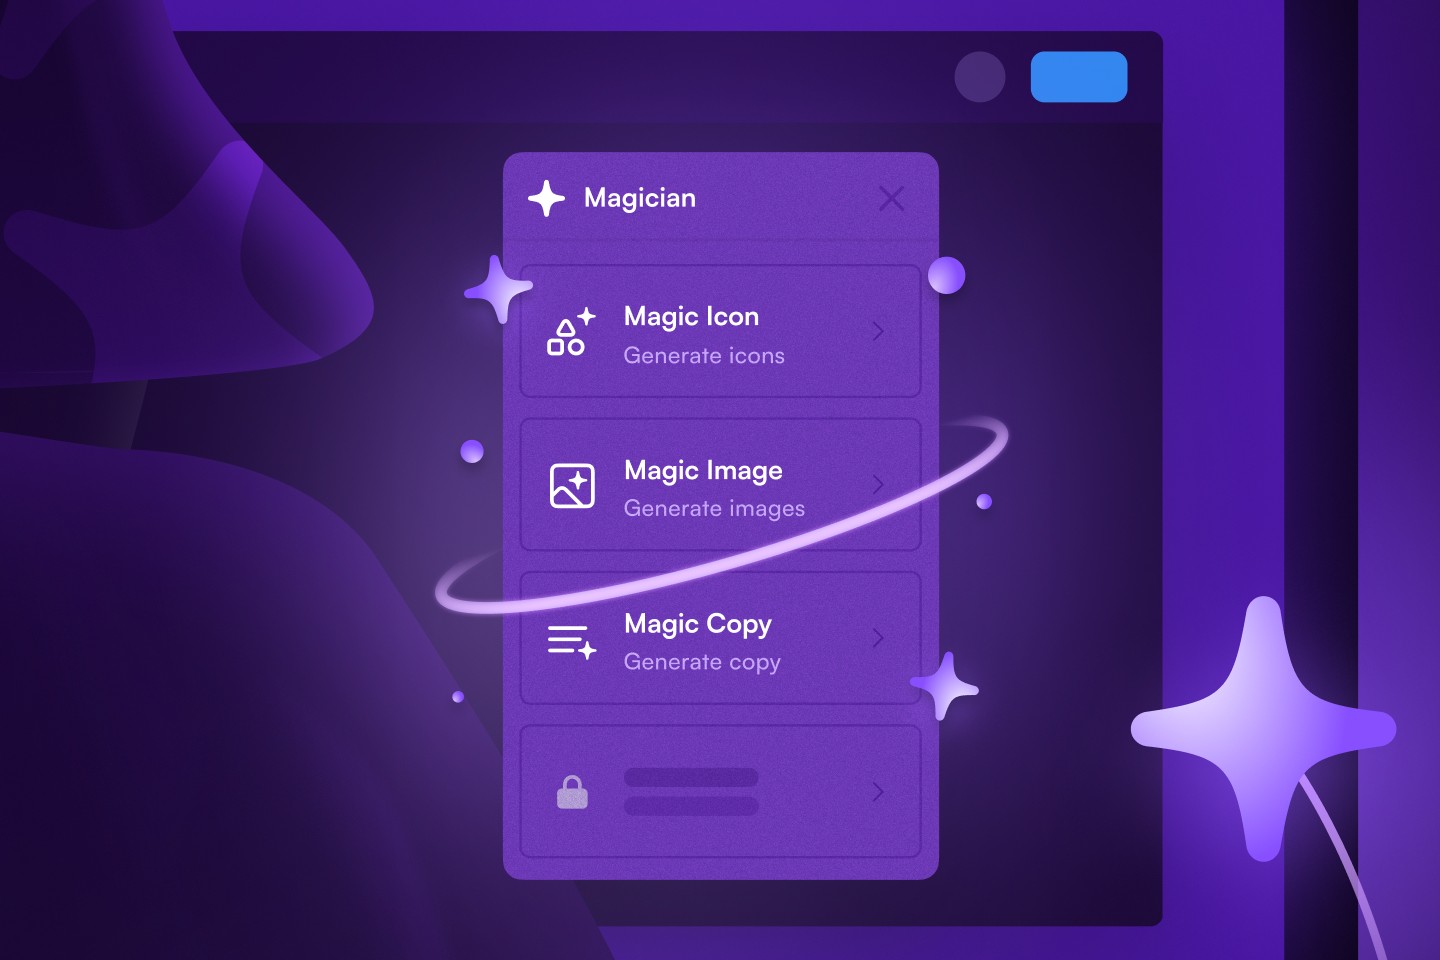 Magician design will be useful for creating animations